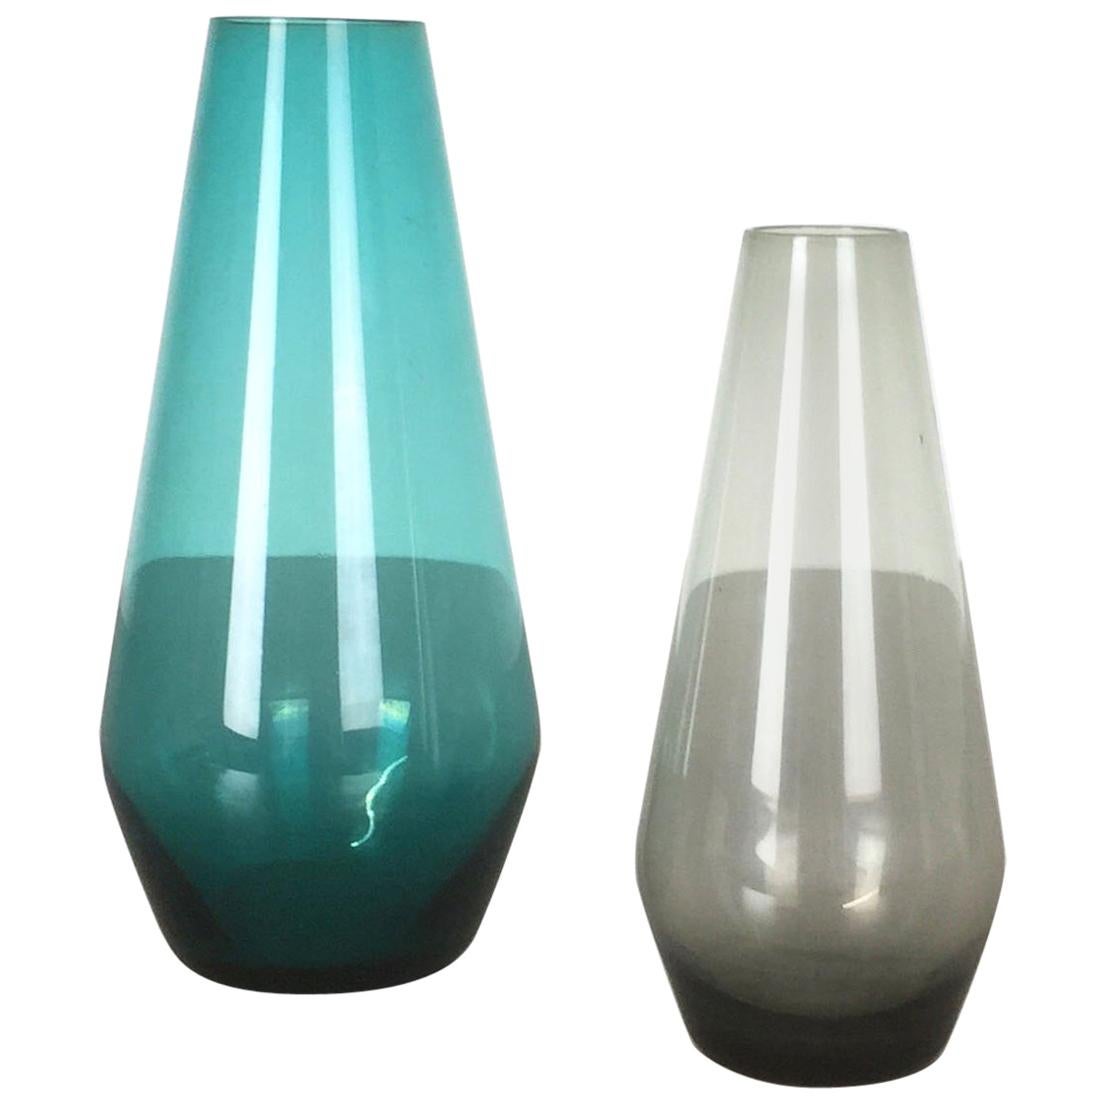 Vintage 1960s Set of Two Turmalin Vases by Wilhelm Wagenfeld for WMF, Germany For Sale